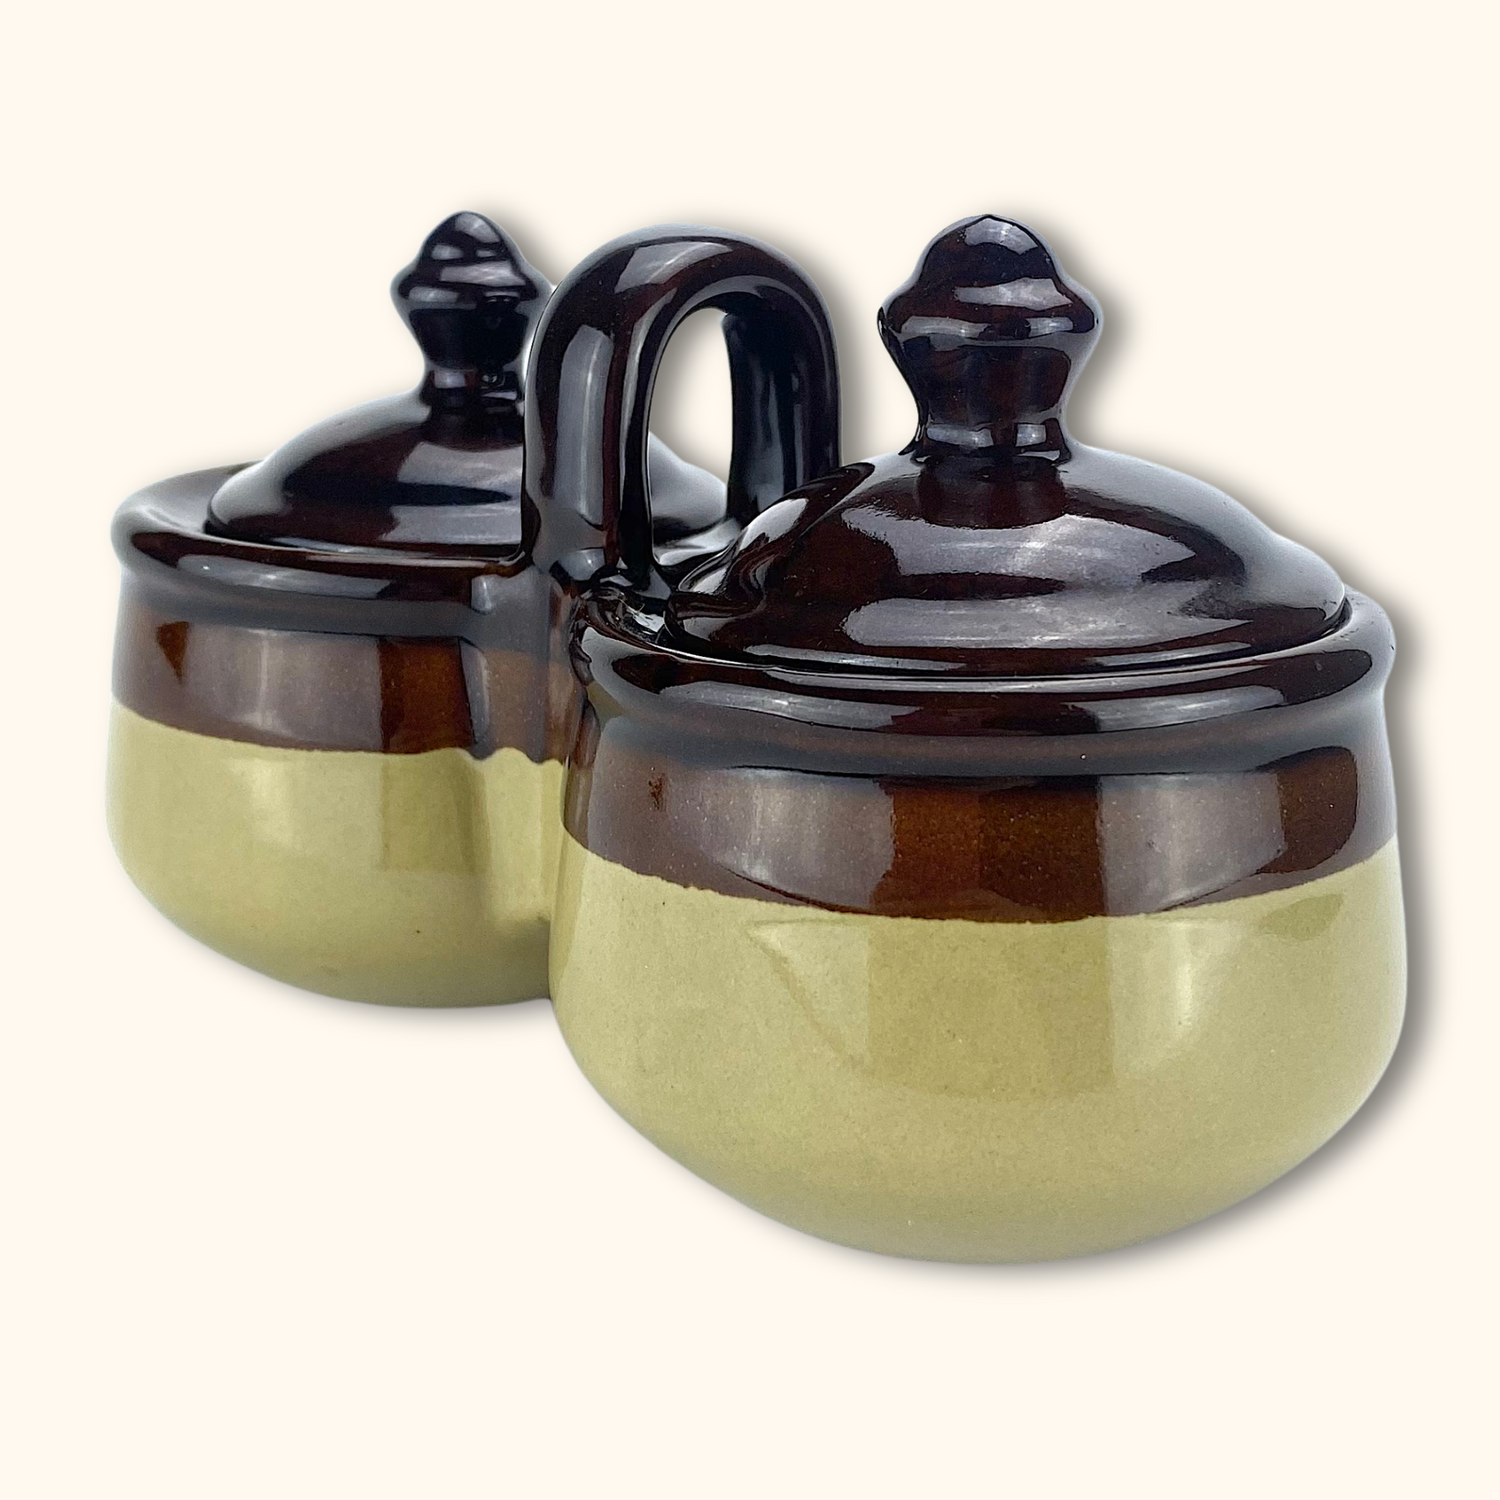 Vintage Stoneware Two-Tone Condiment Caddy with Lids - Sunshine Thrift - Kitchenware